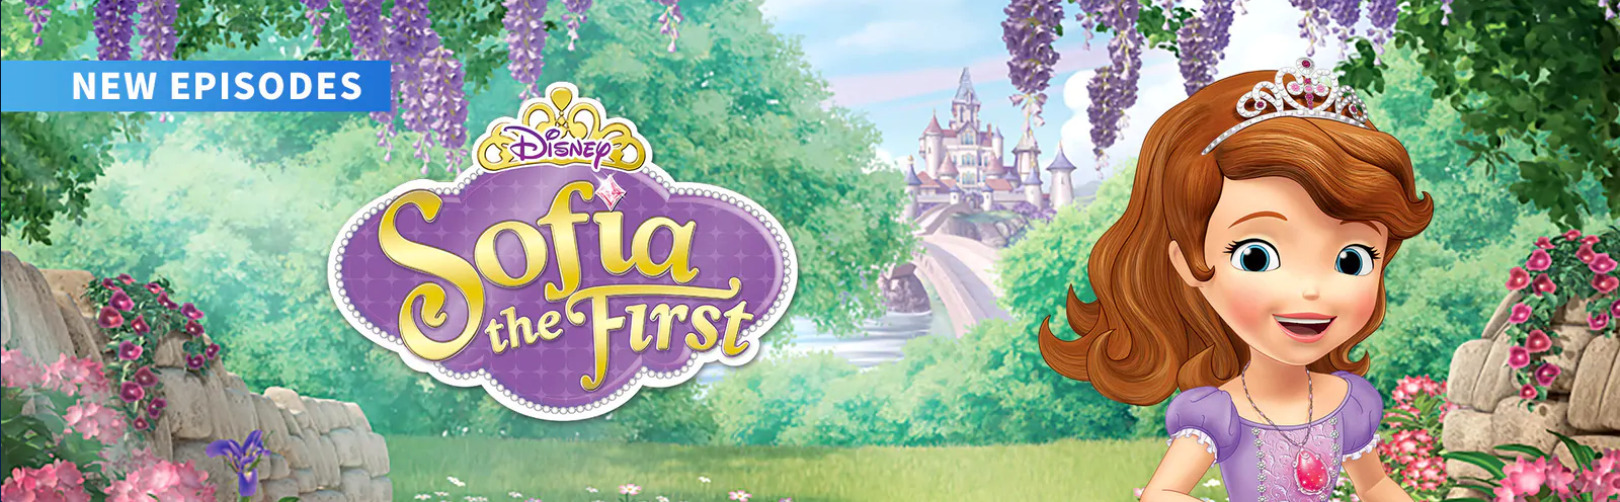 What’s New On DisneyLife Sofia The First August 10th